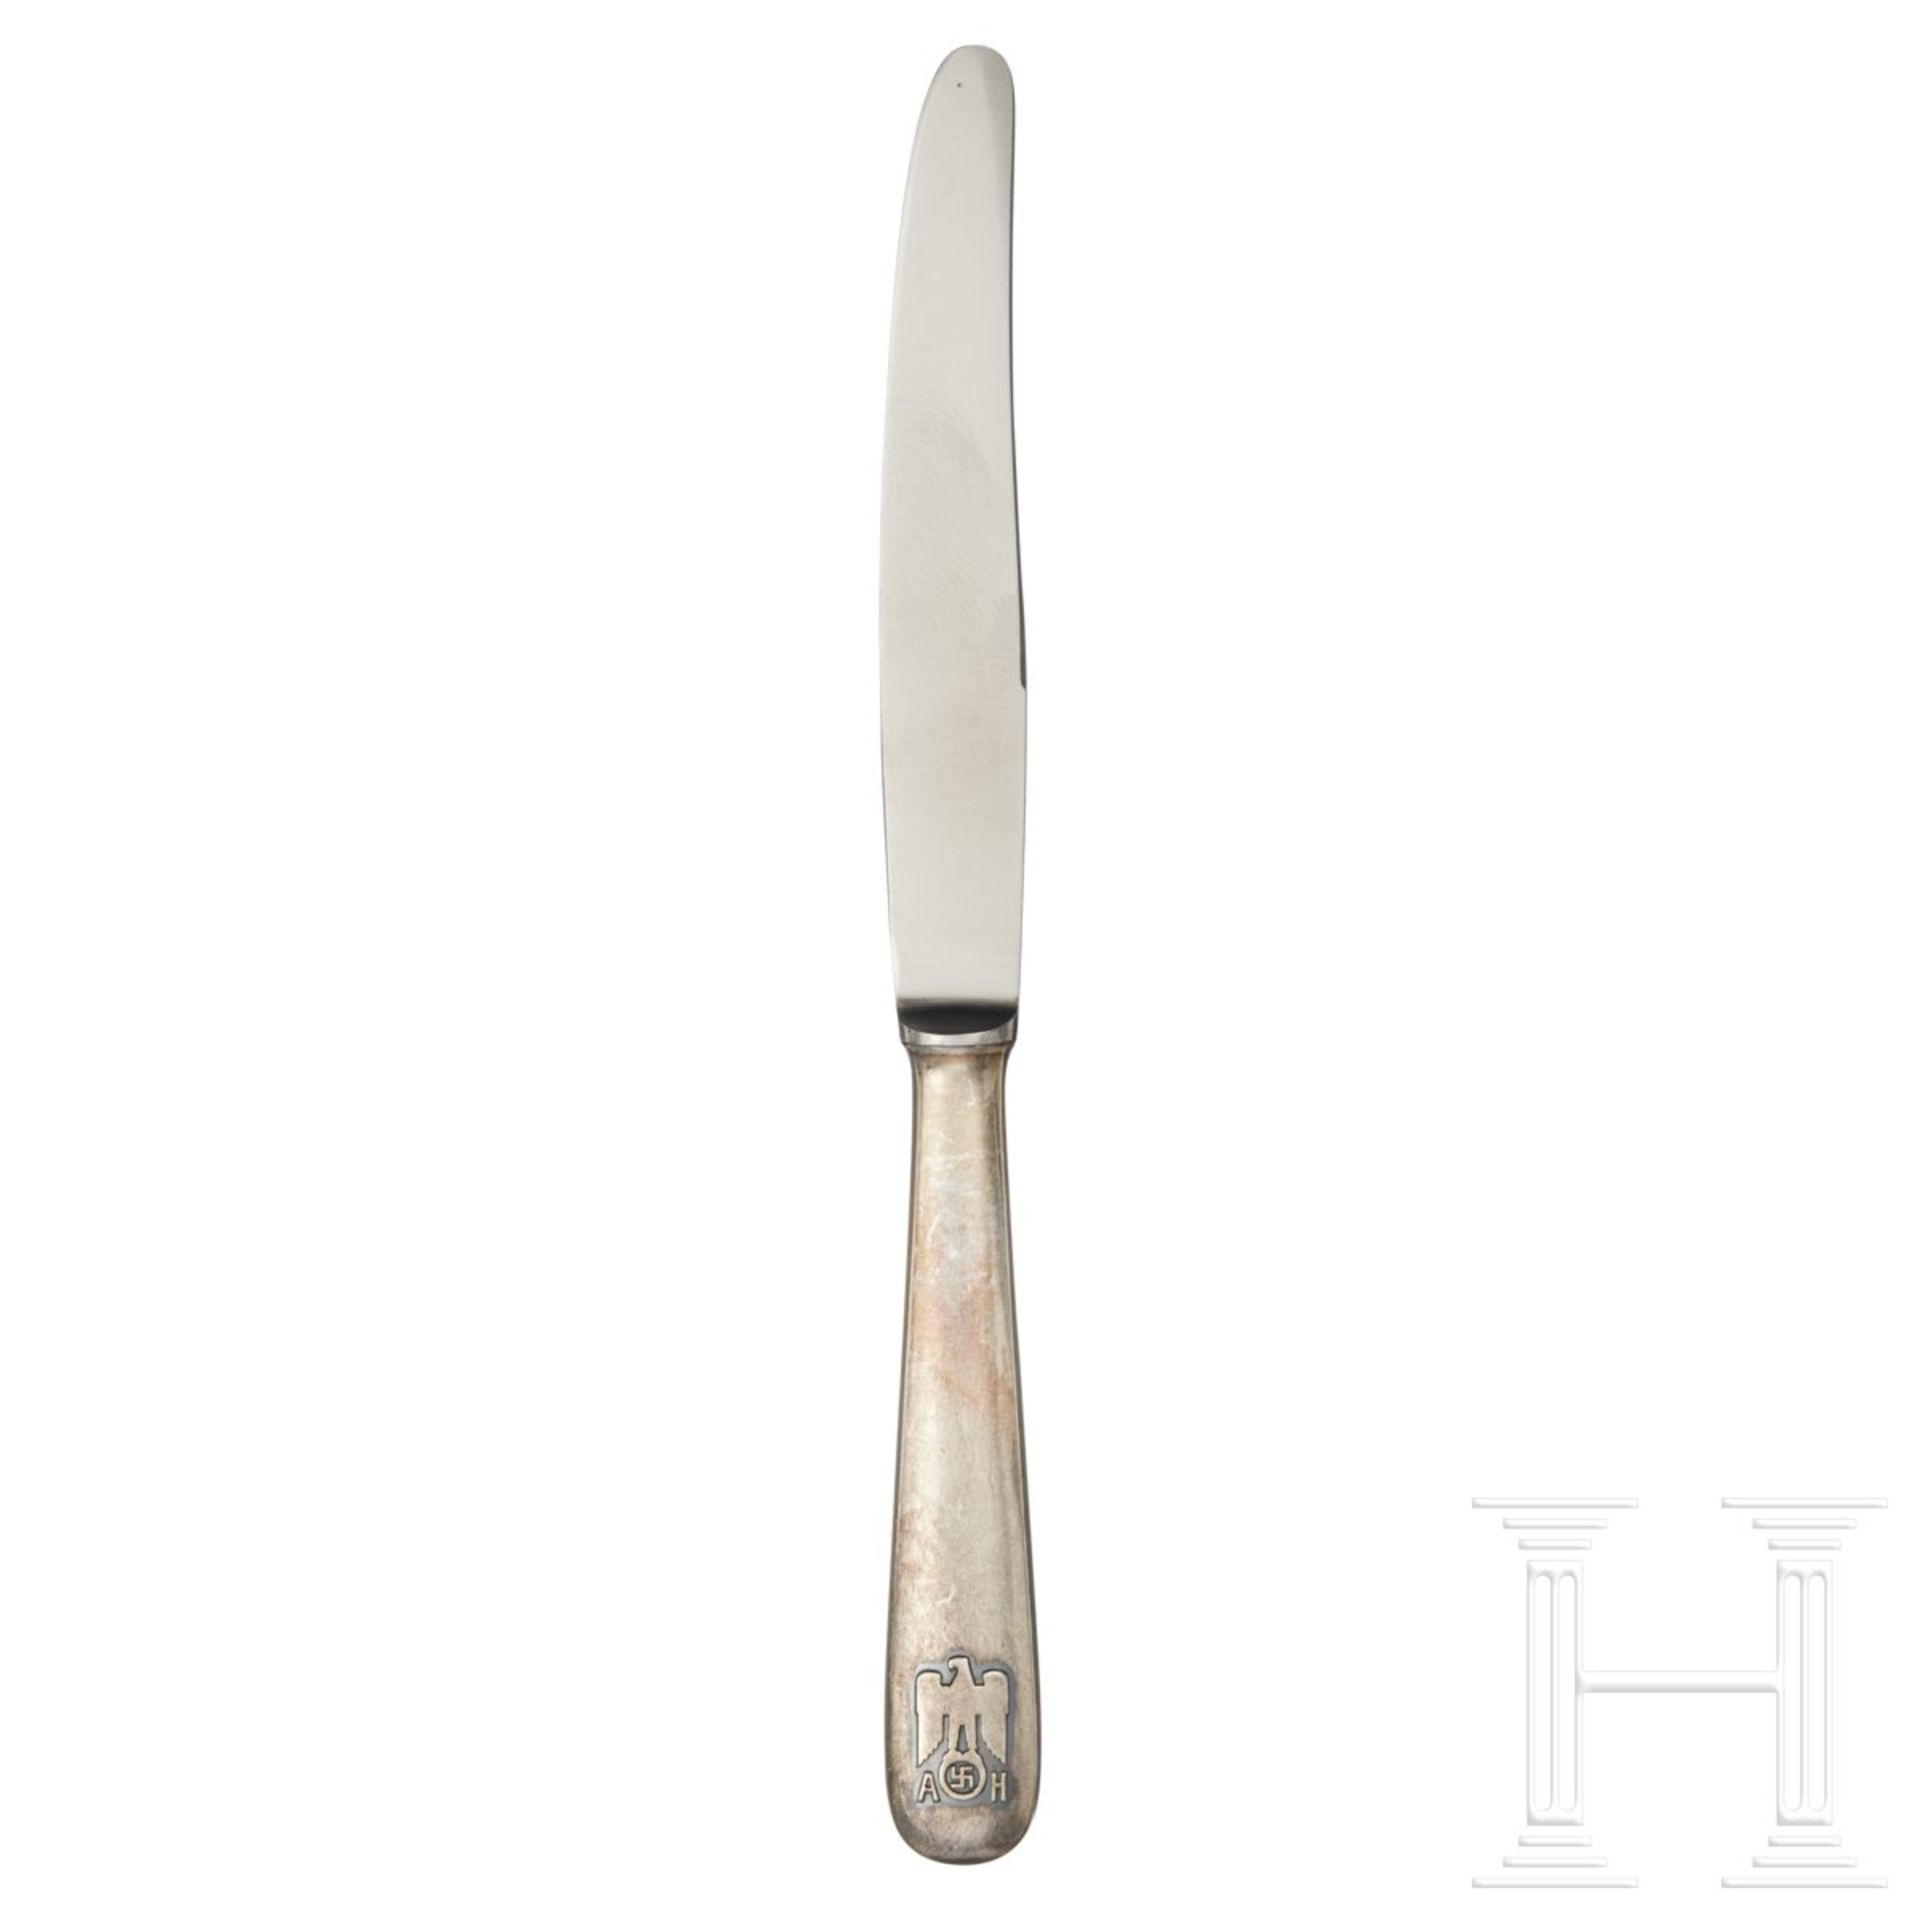 Adolf Hitler – a Dessert Knife from his Personal Silver Service